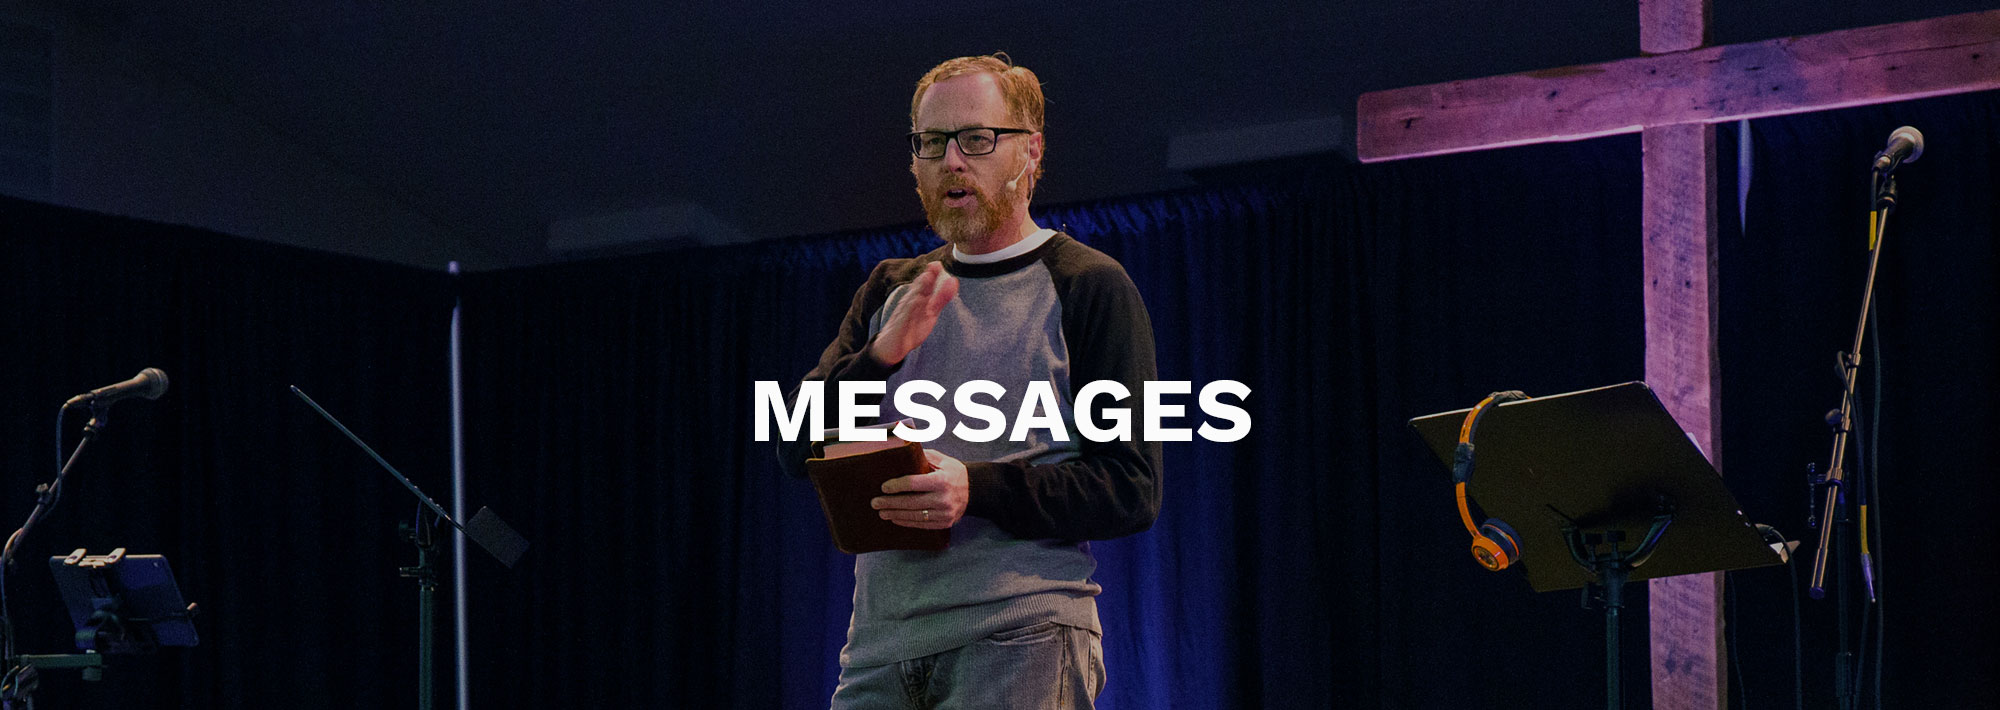 MESSAGES PAGE